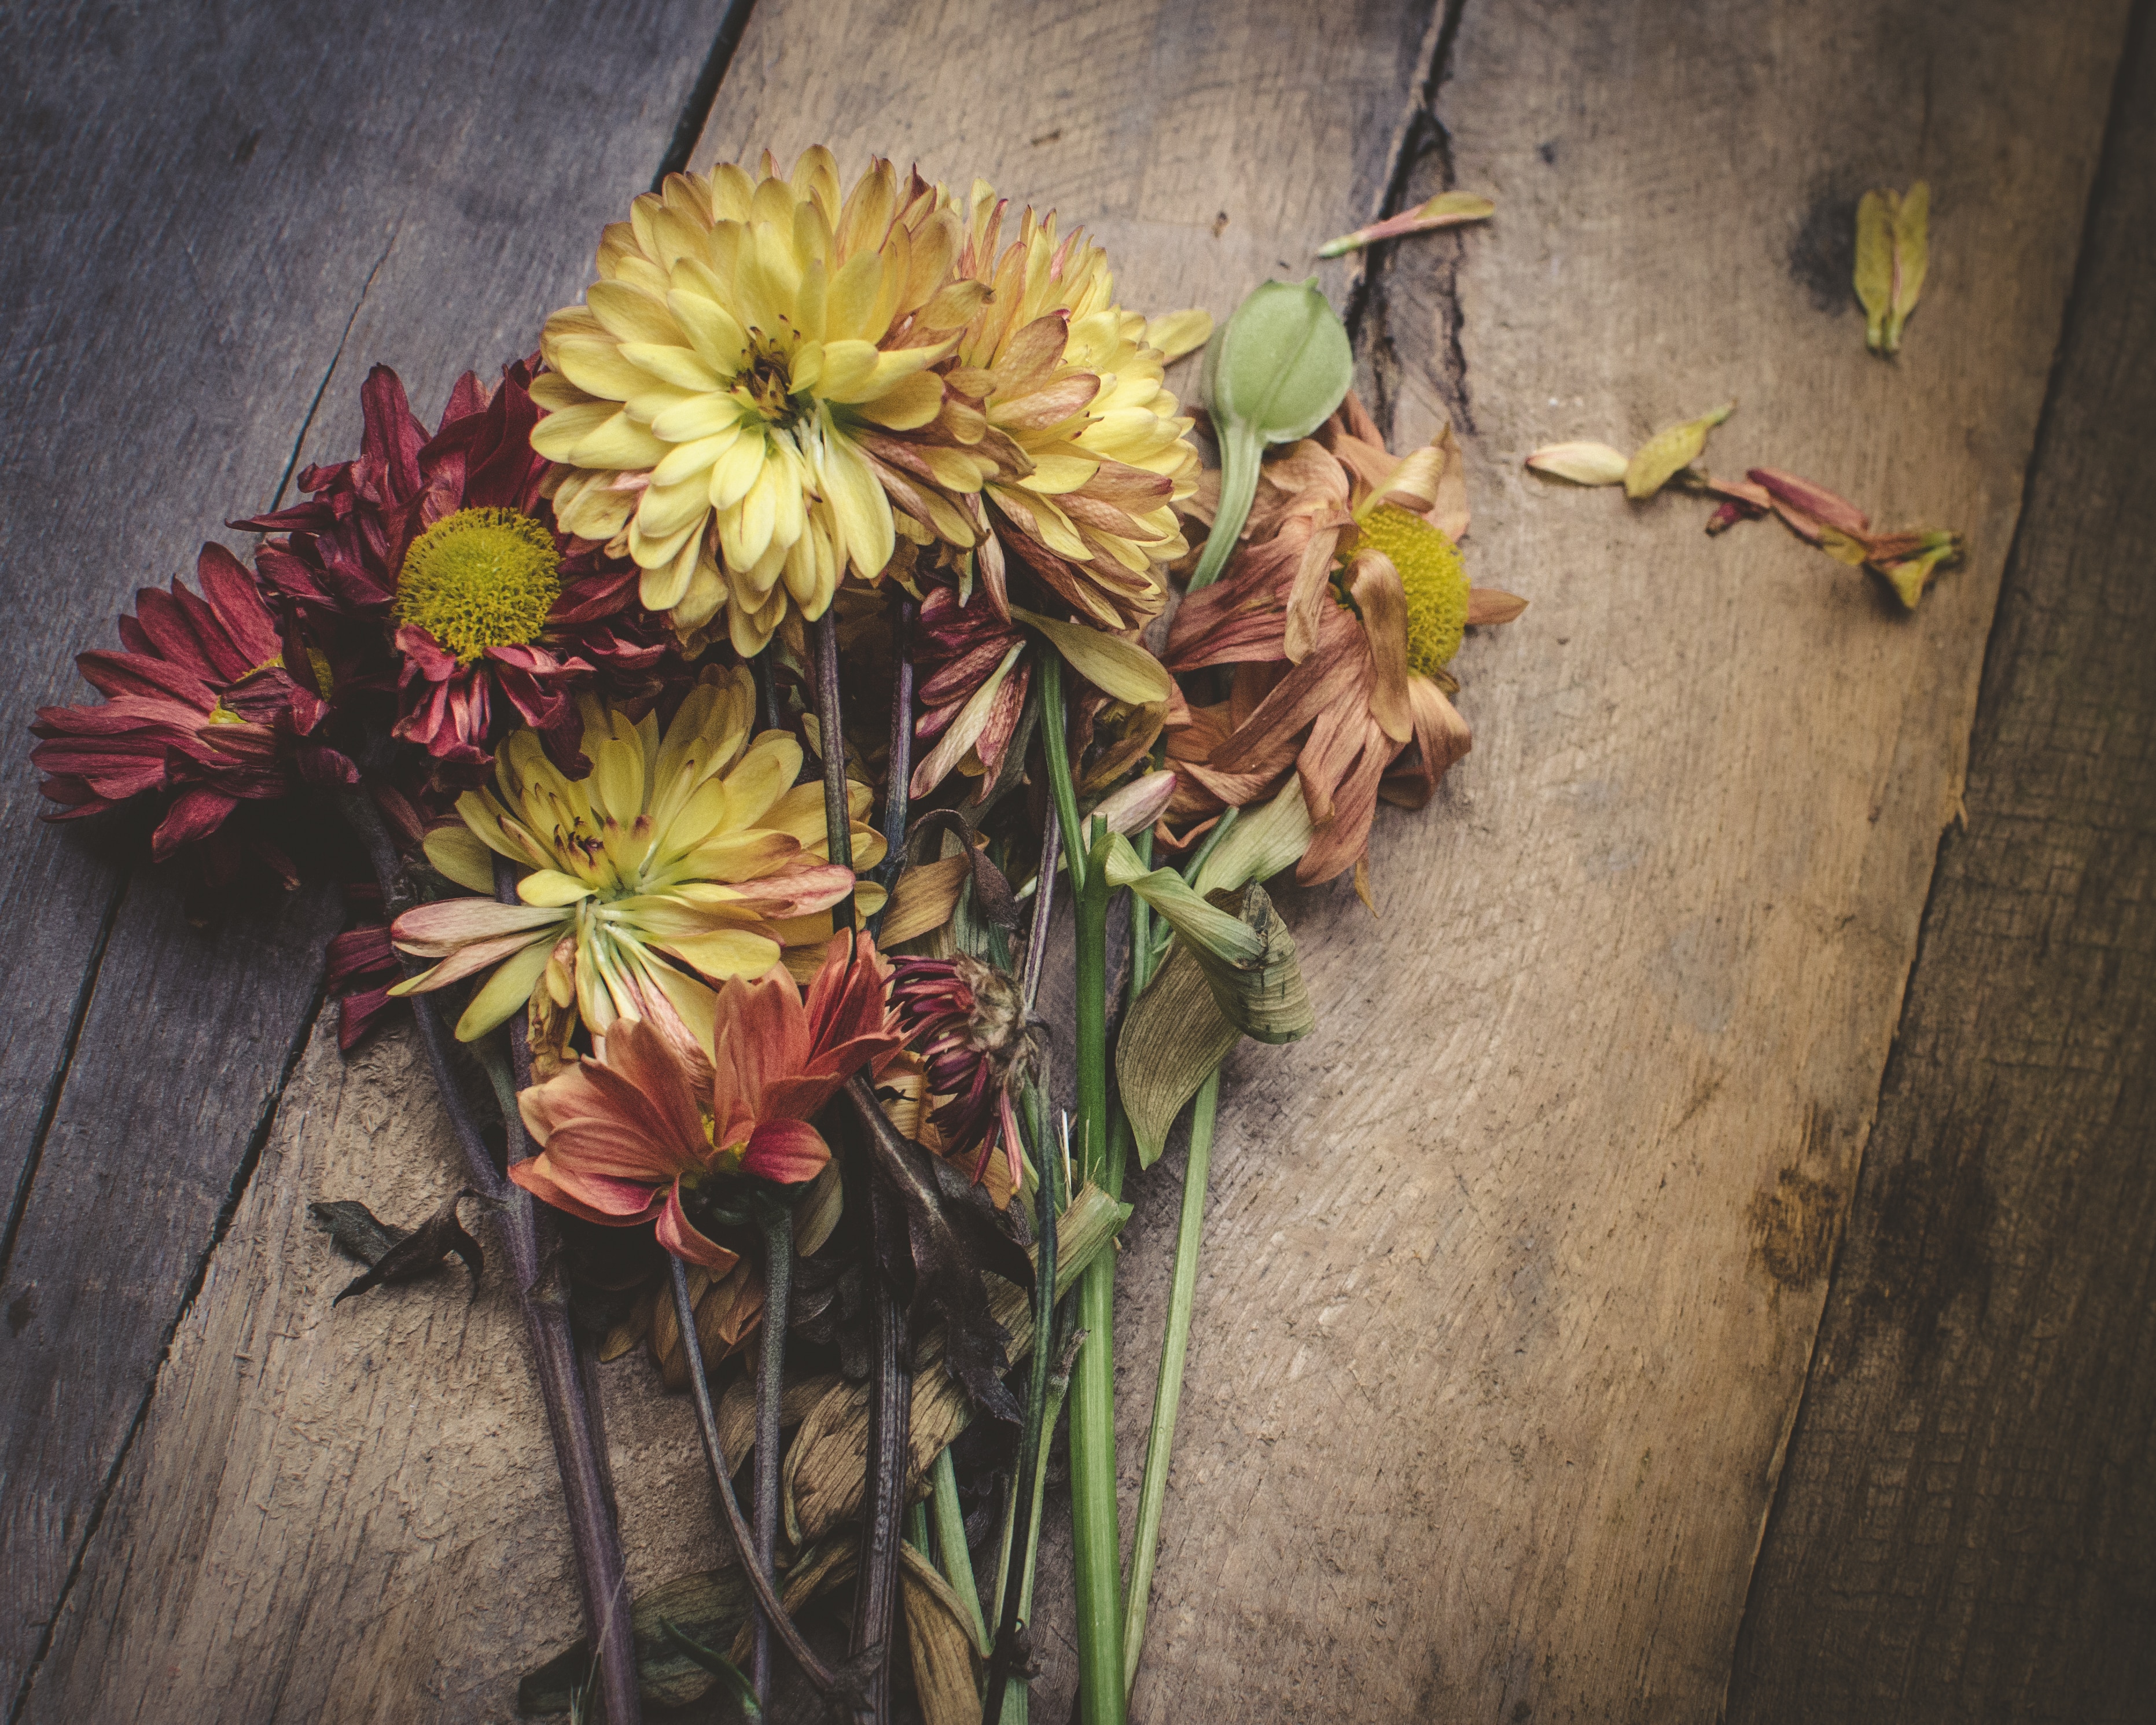 yellow and red daisy flowers on brown wooden surface